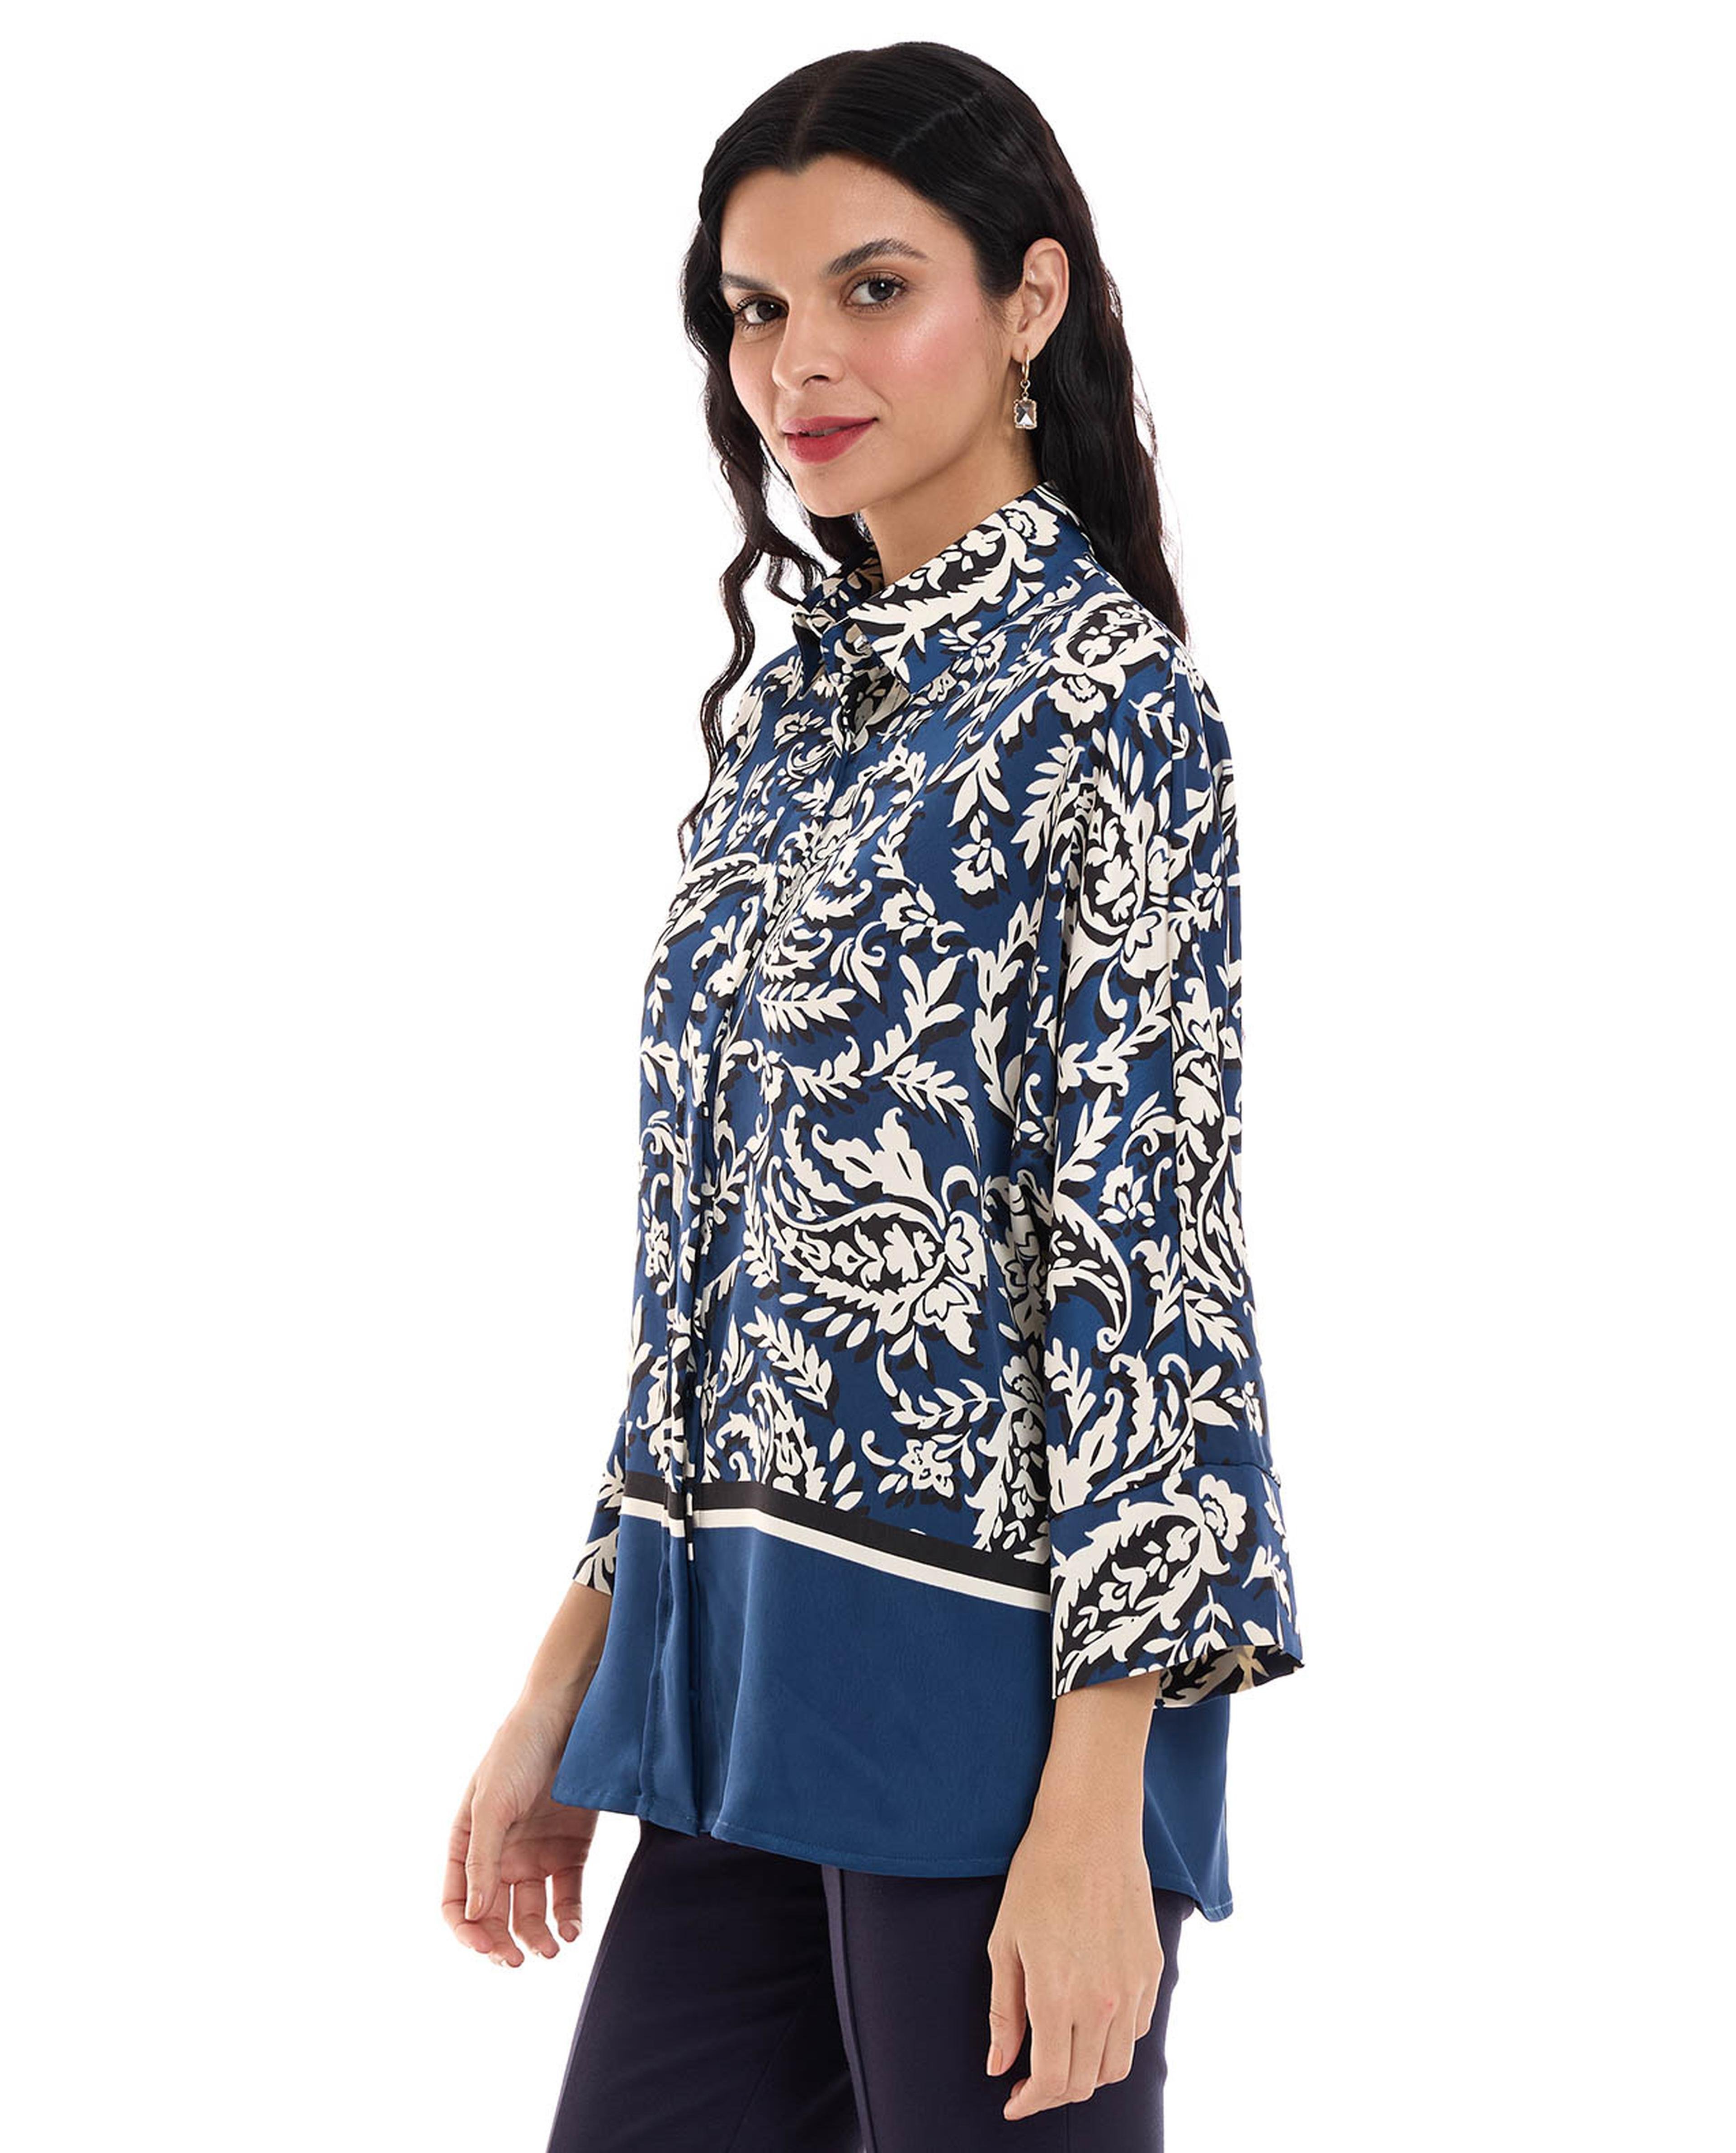 Patterned Shirt with Classic Collar and 3/4 Sleeves